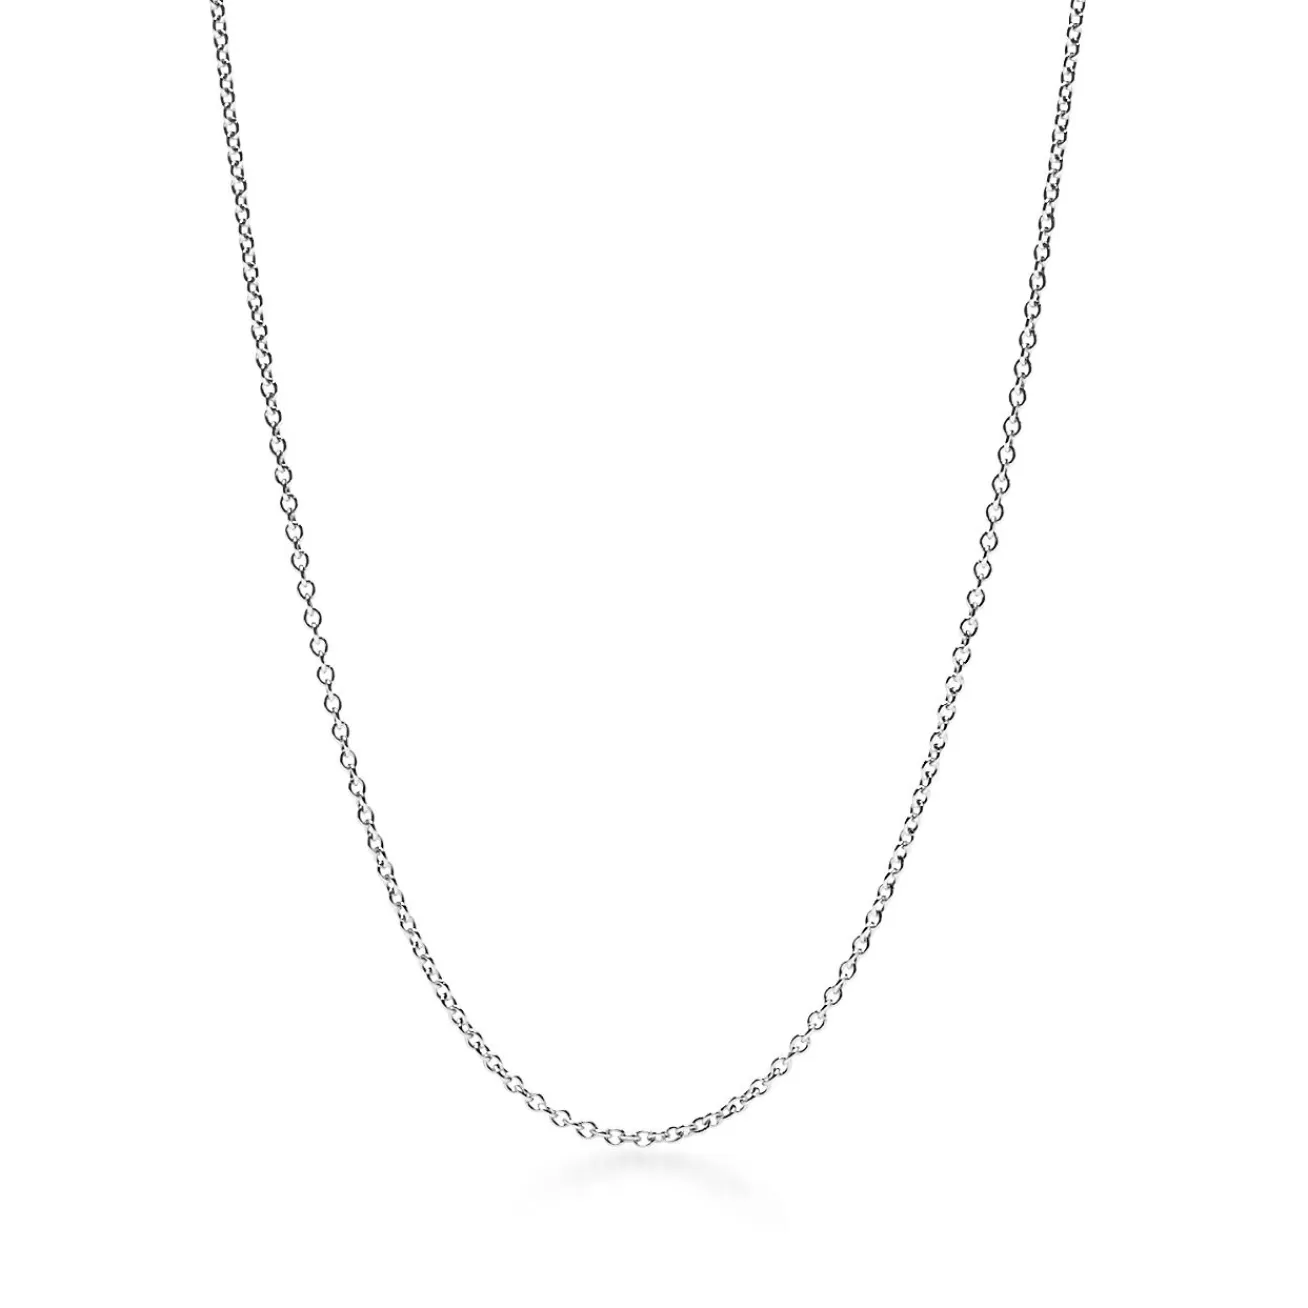 Tiffany & Co. Chain in 18k white gold, 18" long. | ^ Necklaces & Pendants | Necklaces & Pendants